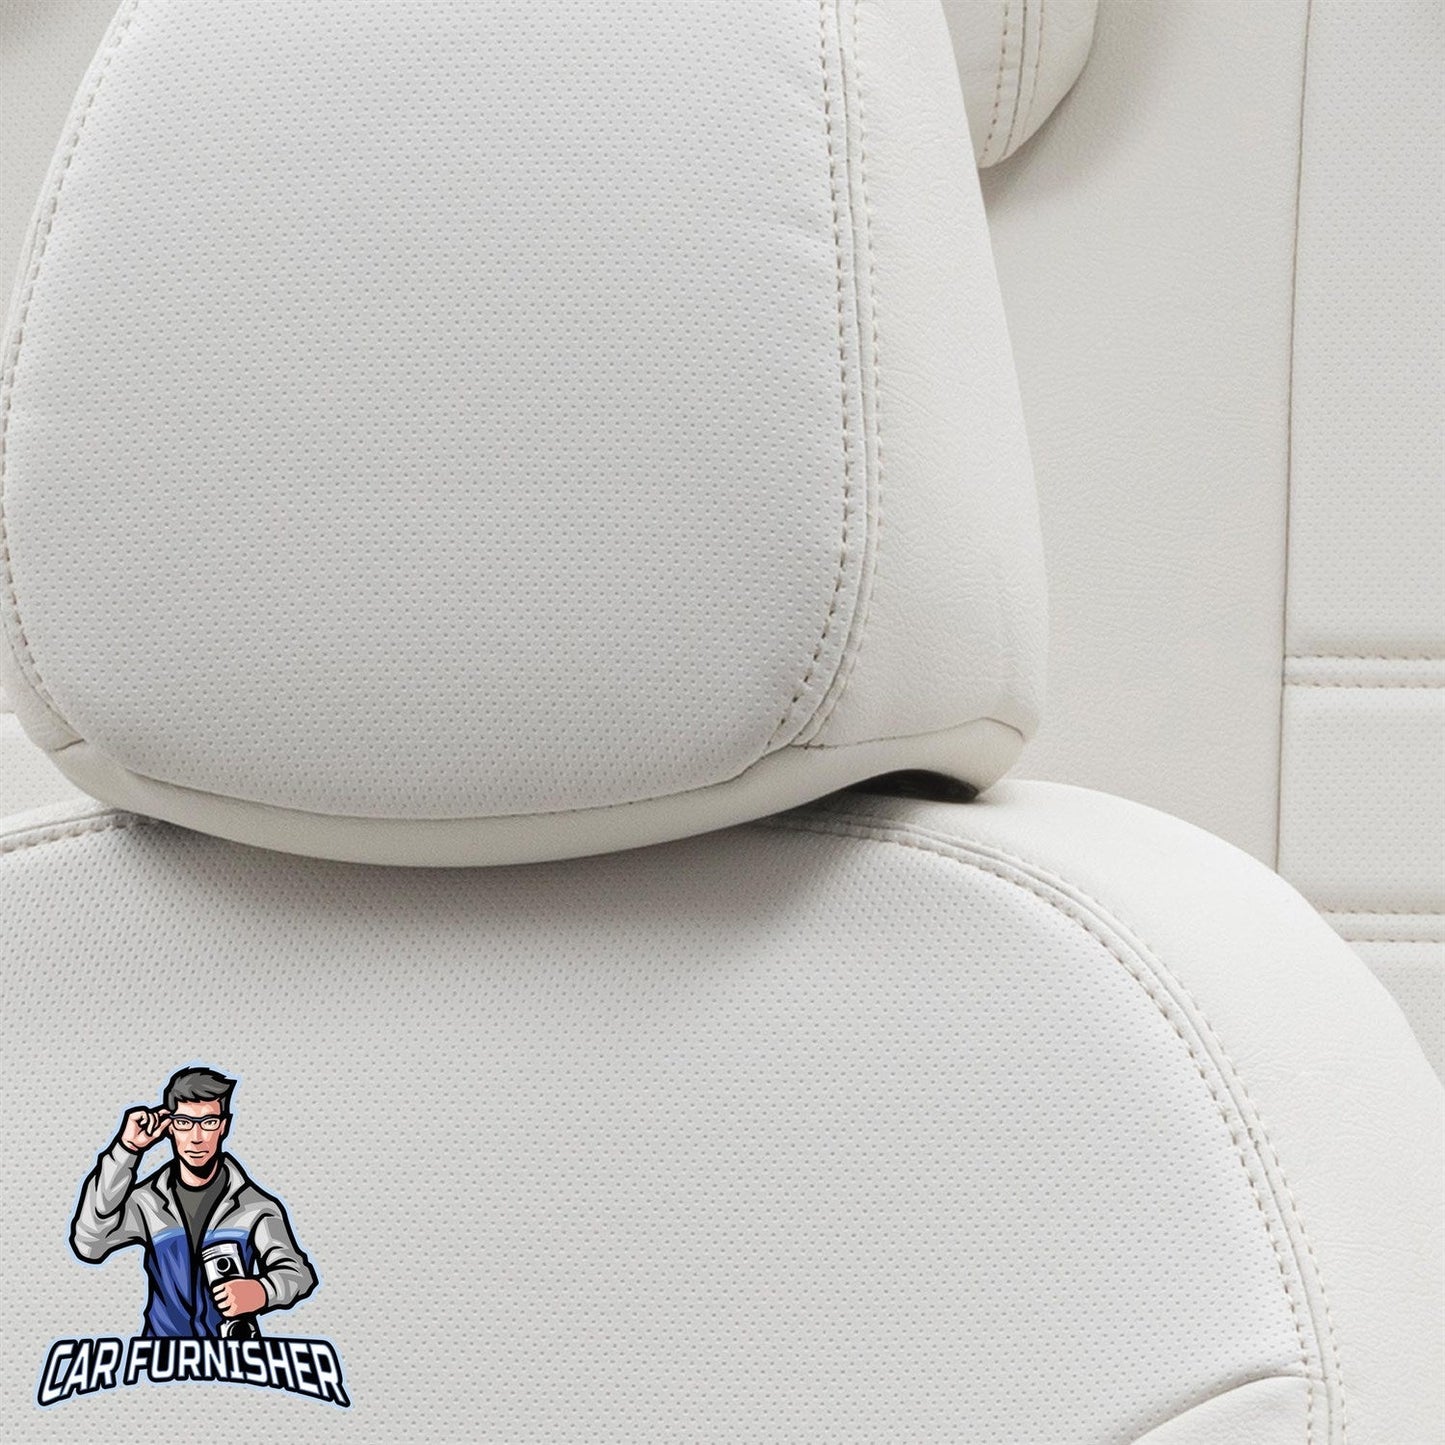 Hyundai Starex Seat Covers Istanbul Leather Design Ivory Leather